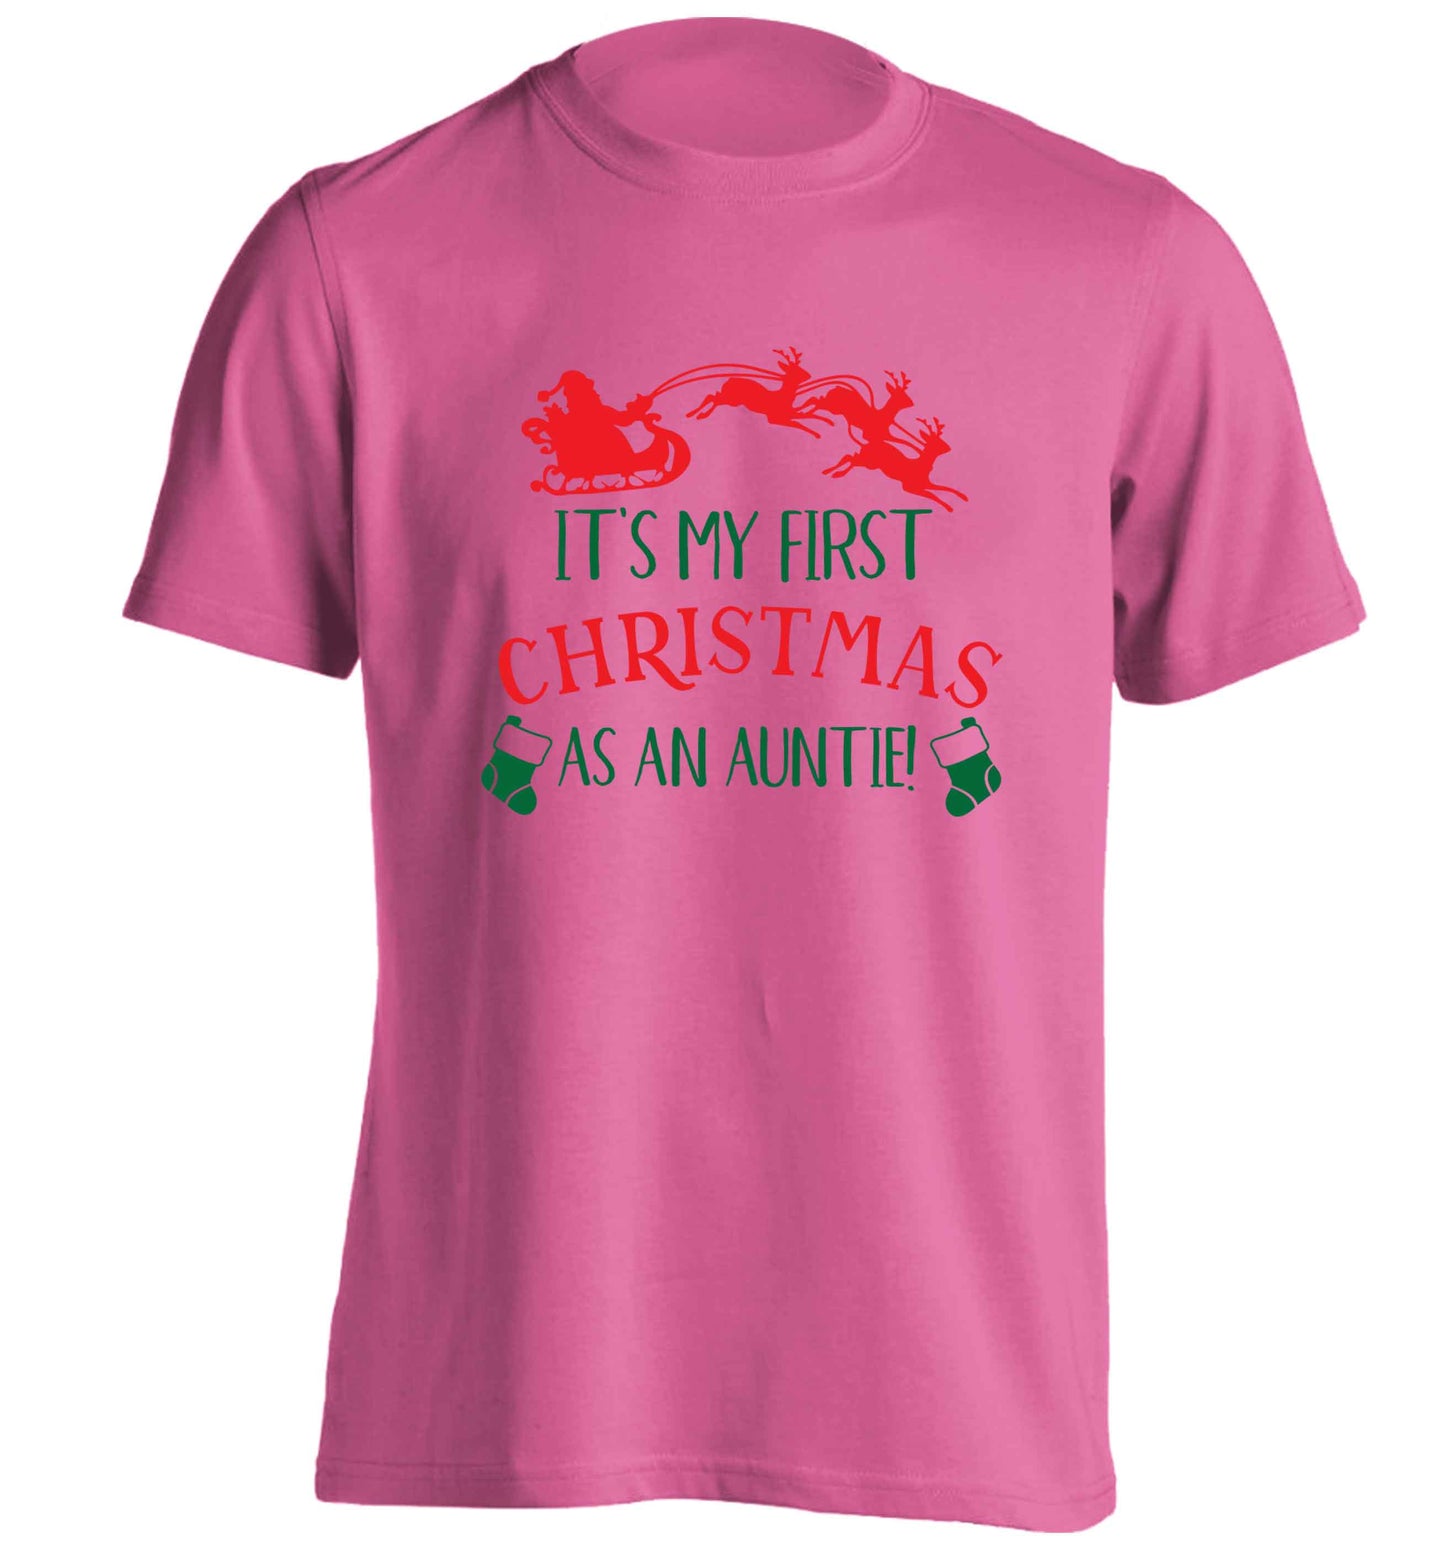 It's my first Christmas as an auntie! adults unisex pink Tshirt 2XL